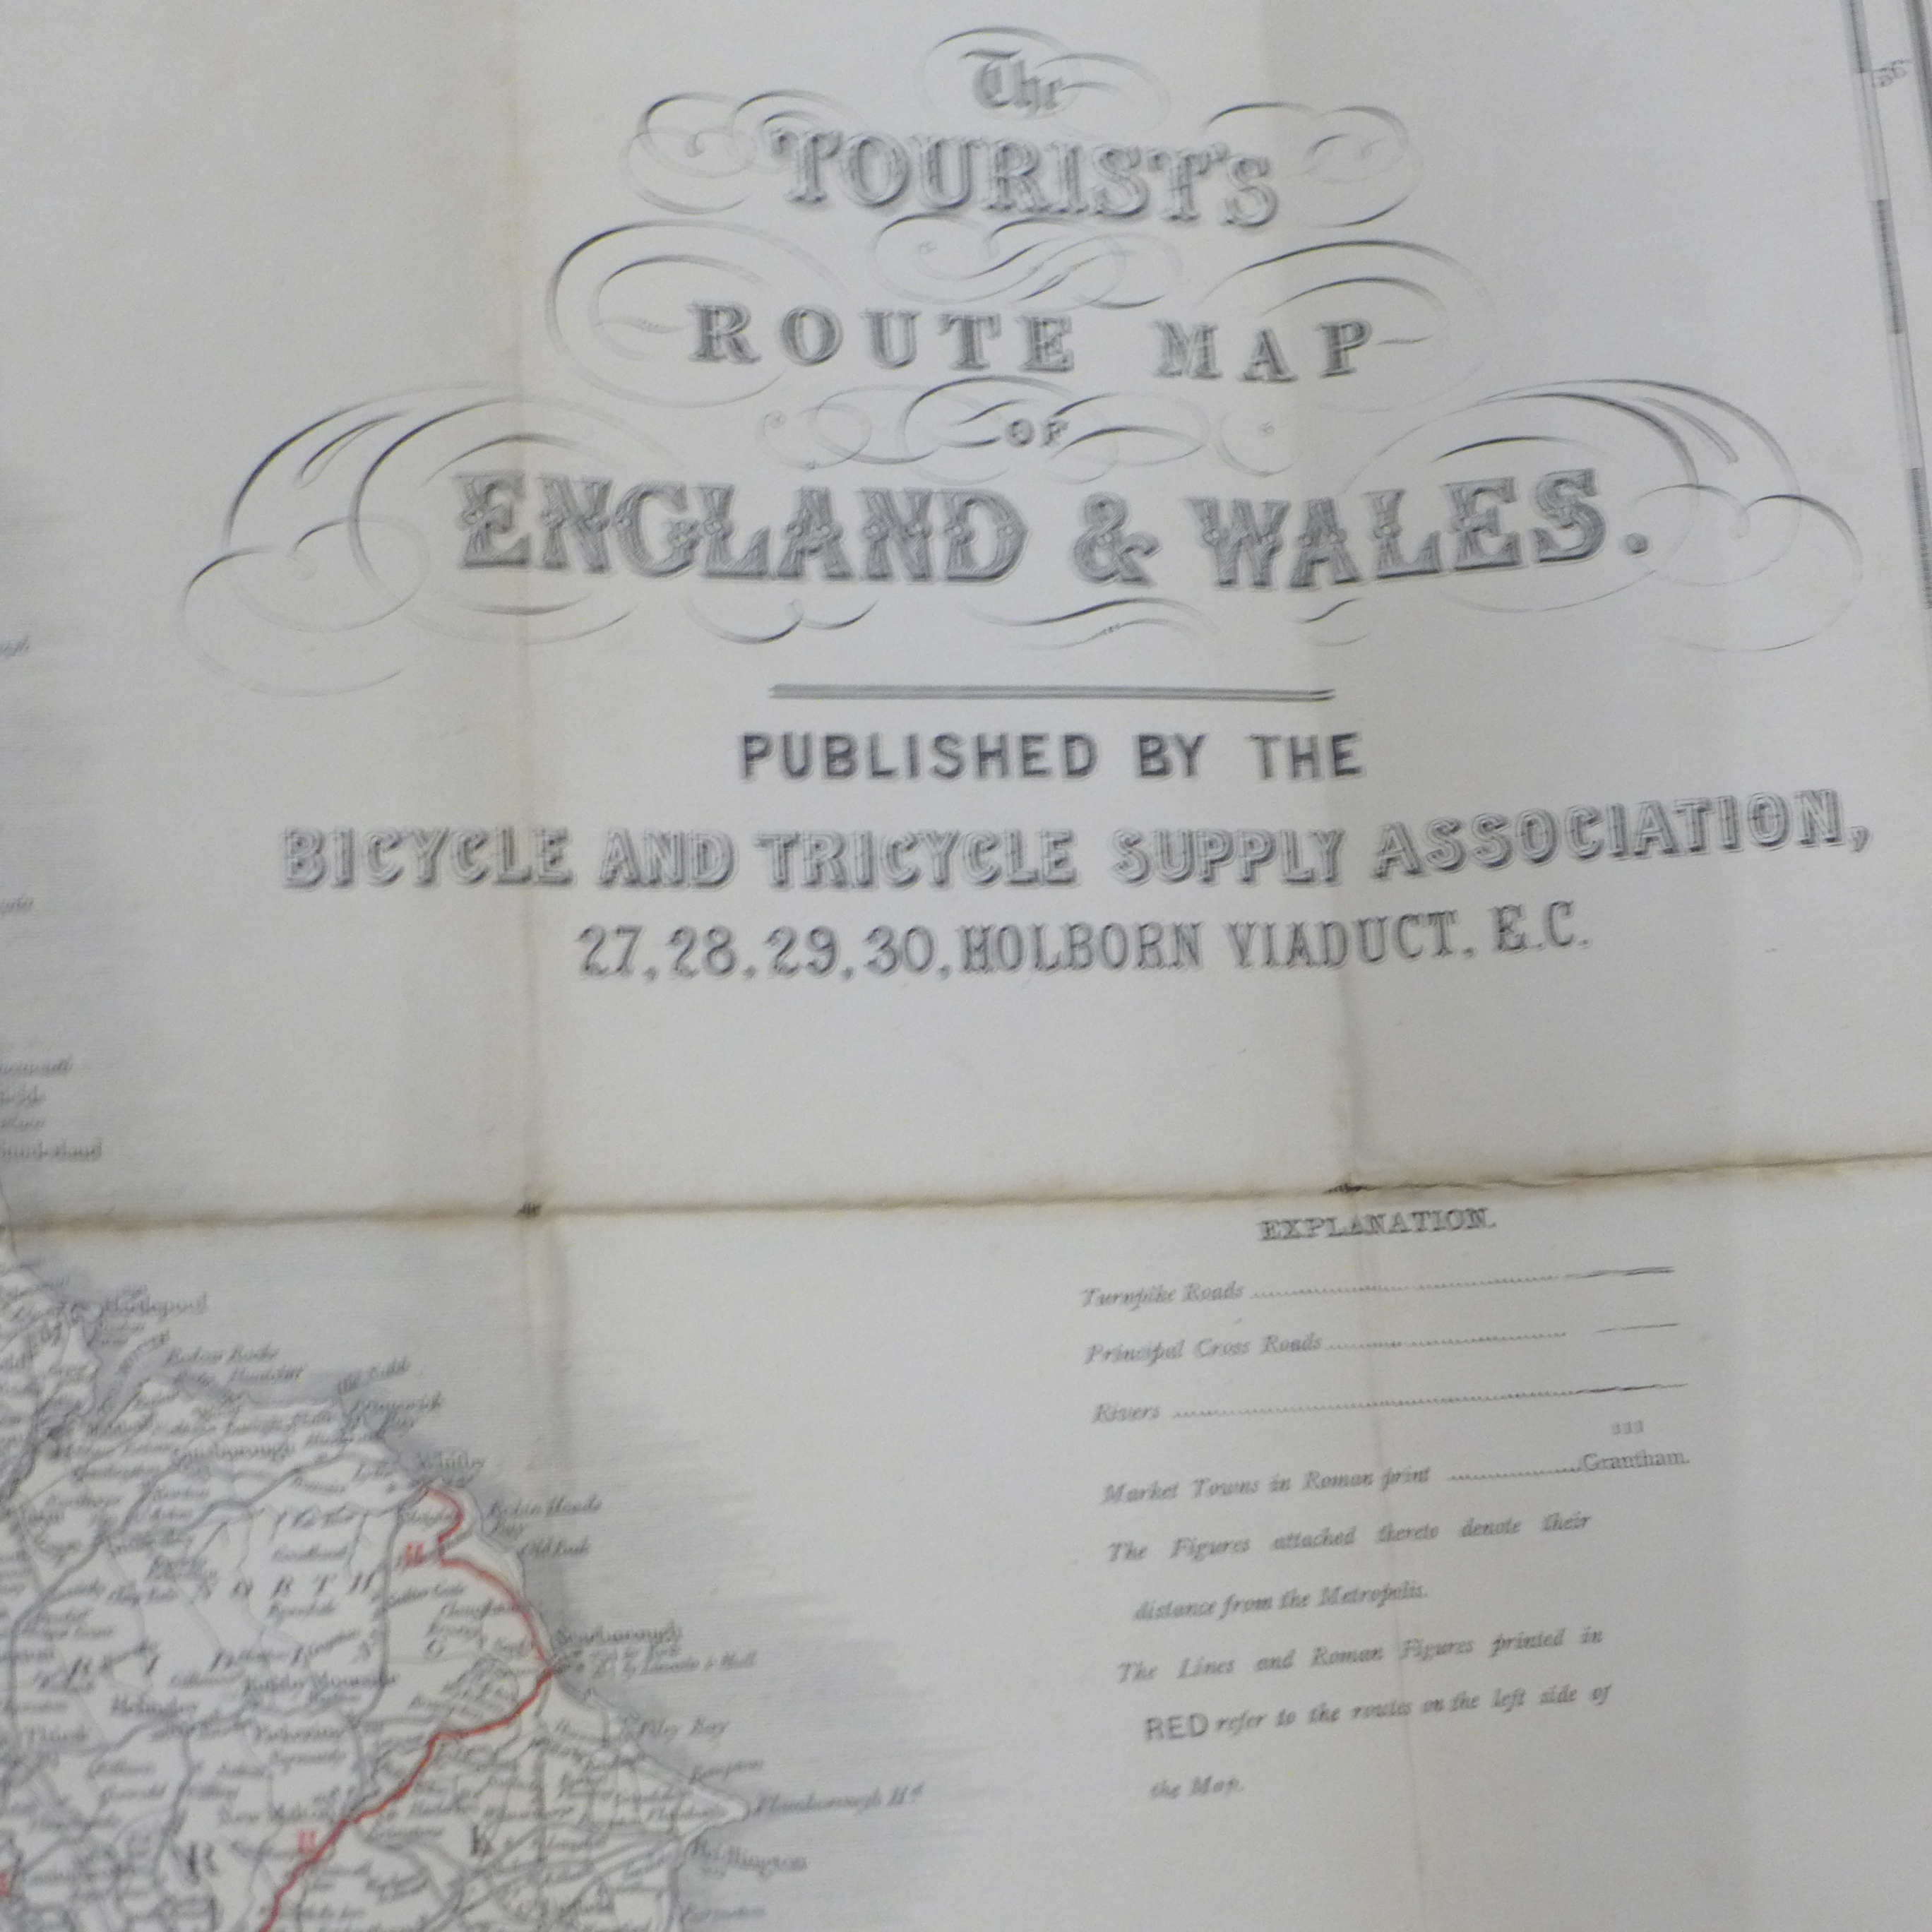 The Tourist's Route Map of England and Wales, Published by The Bicycle and Tricycle Supply - Image 6 of 7